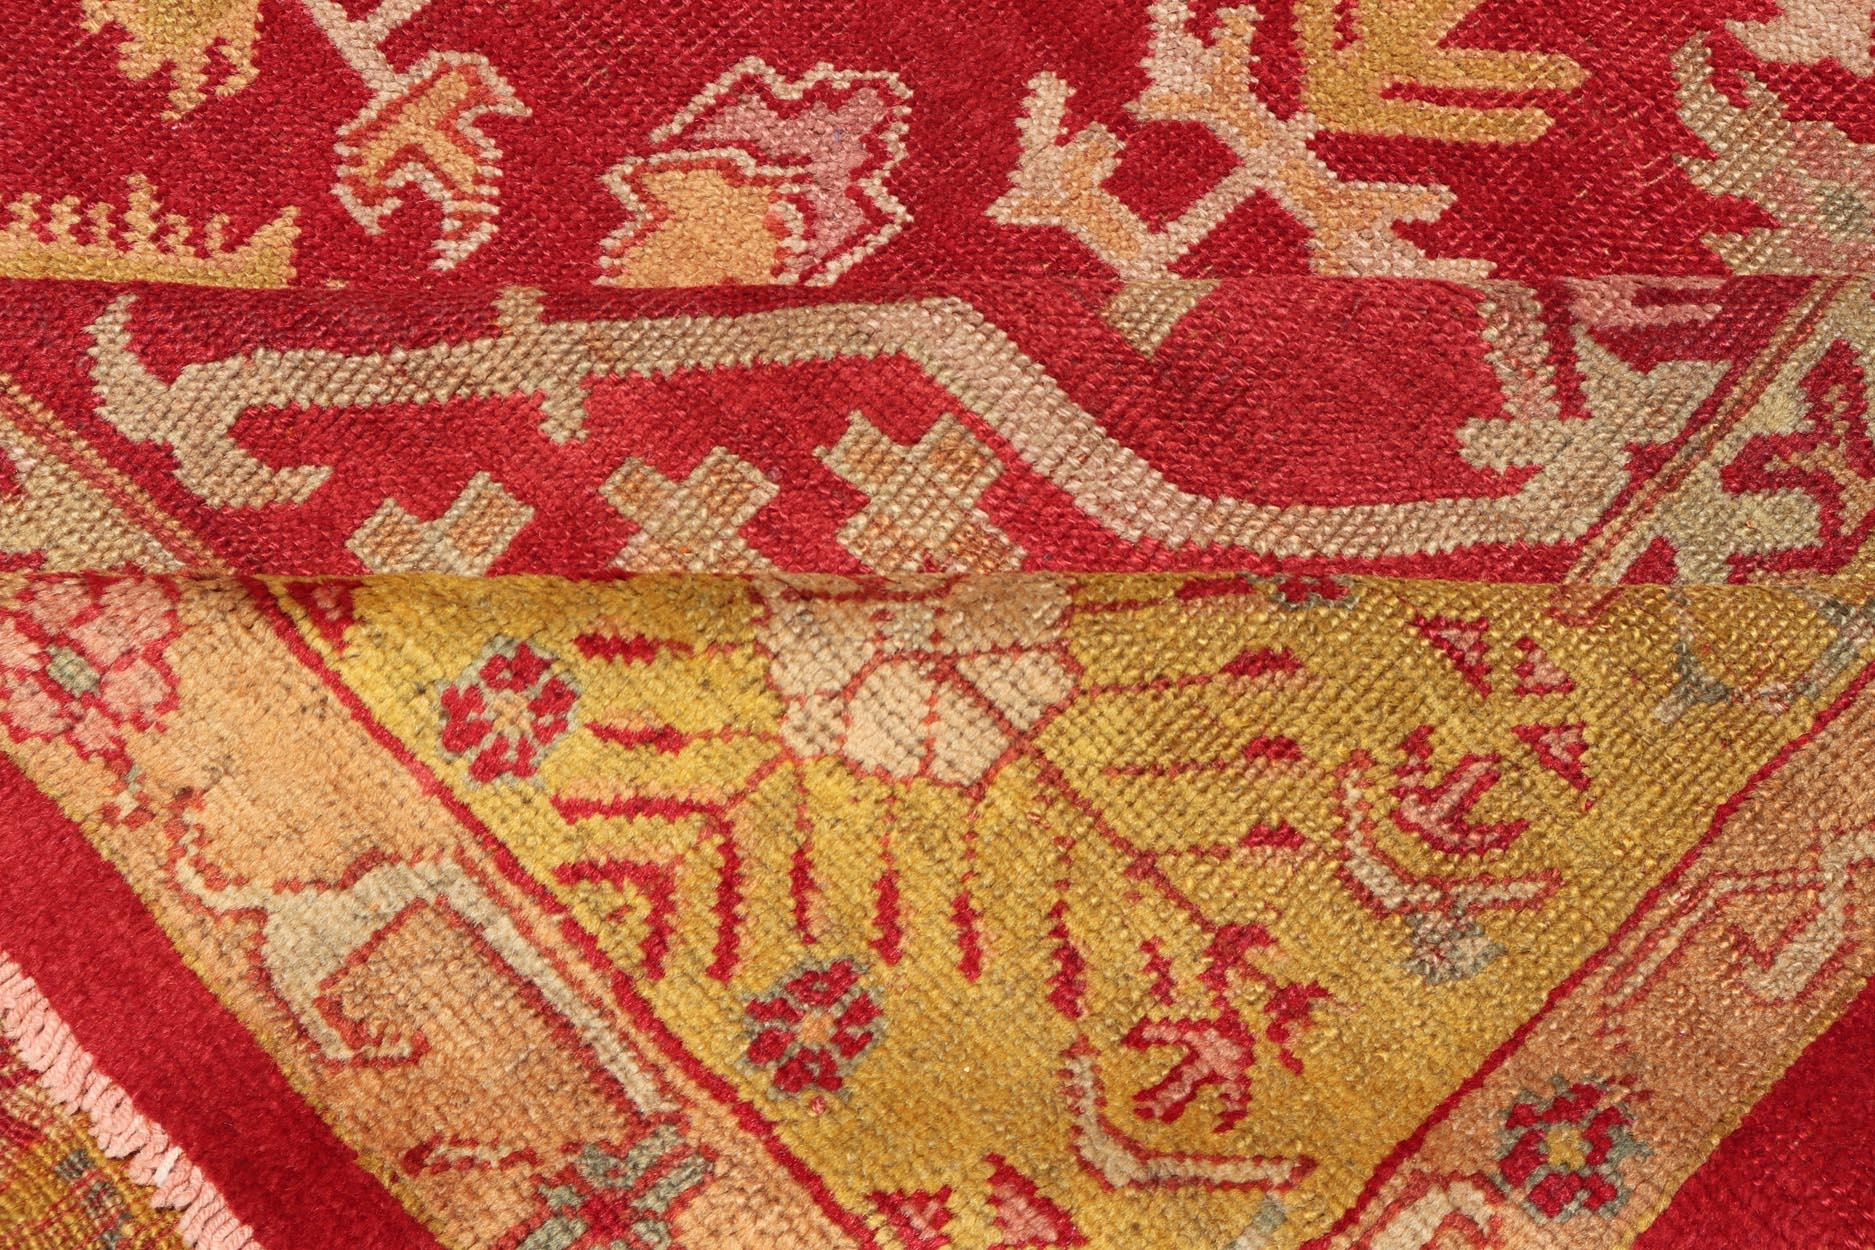 Antique Turkish Oushak Rug in Royal Red and Saffron Gold with Geometric Design For Sale 7